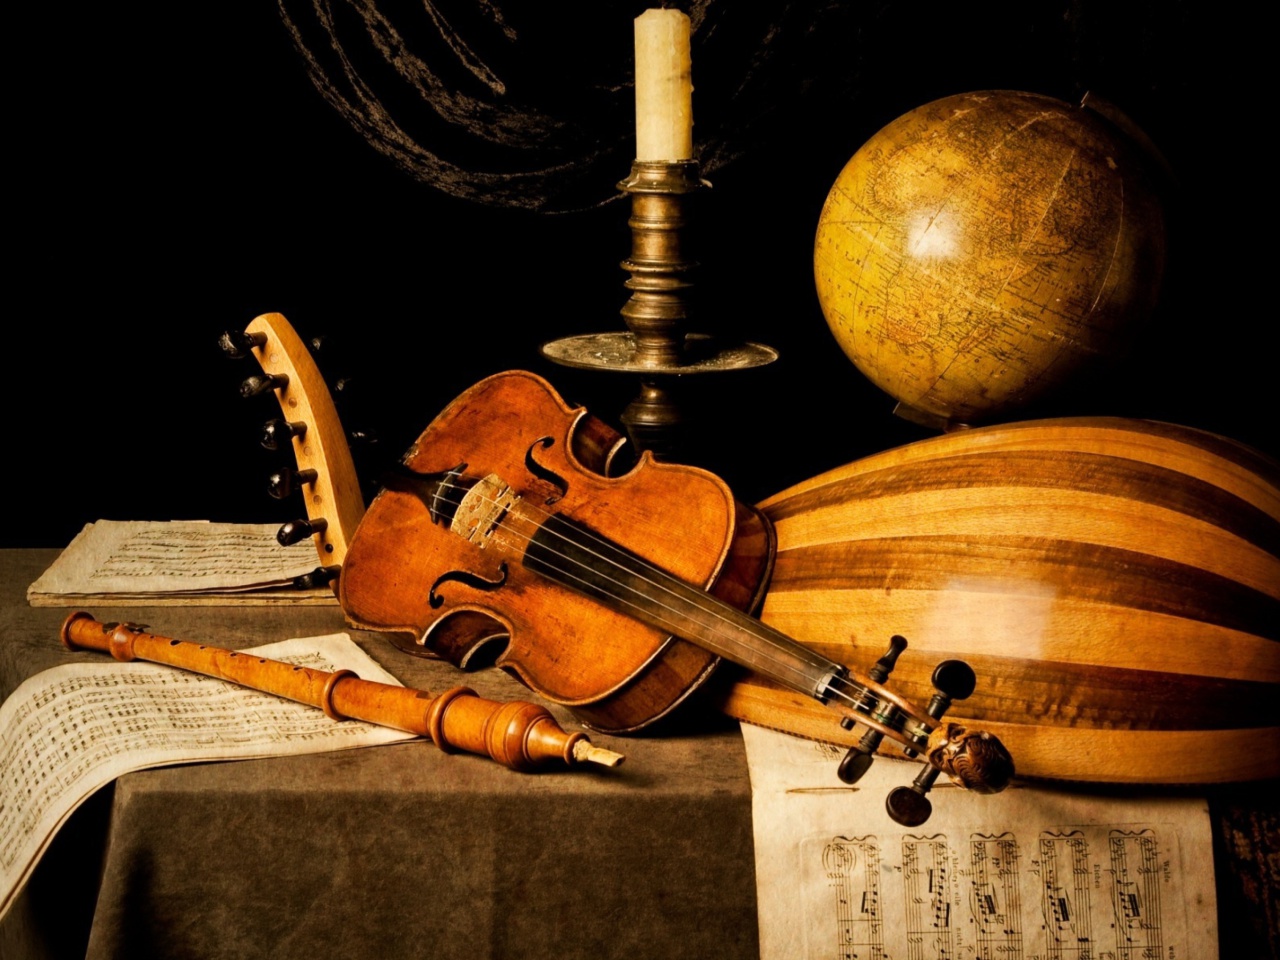 Still life with violin and flute screenshot #1 1280x960